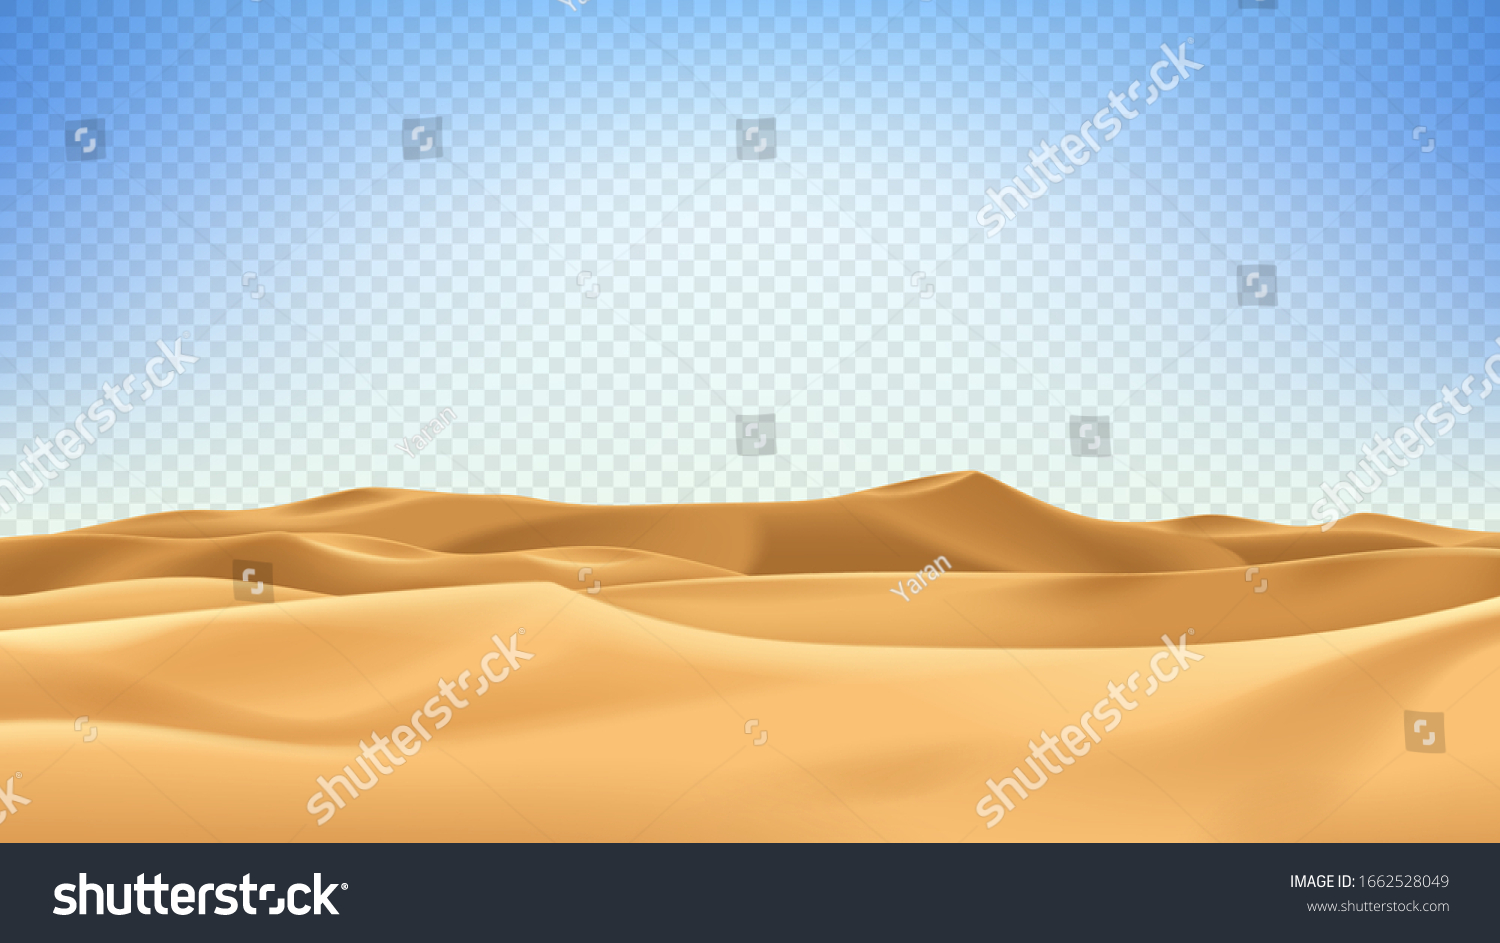 SVG of Realistic desert landscape isolated on checkered background. Beautiful view on realistic sand dunes. 3d vector illustration of sandy desert. svg